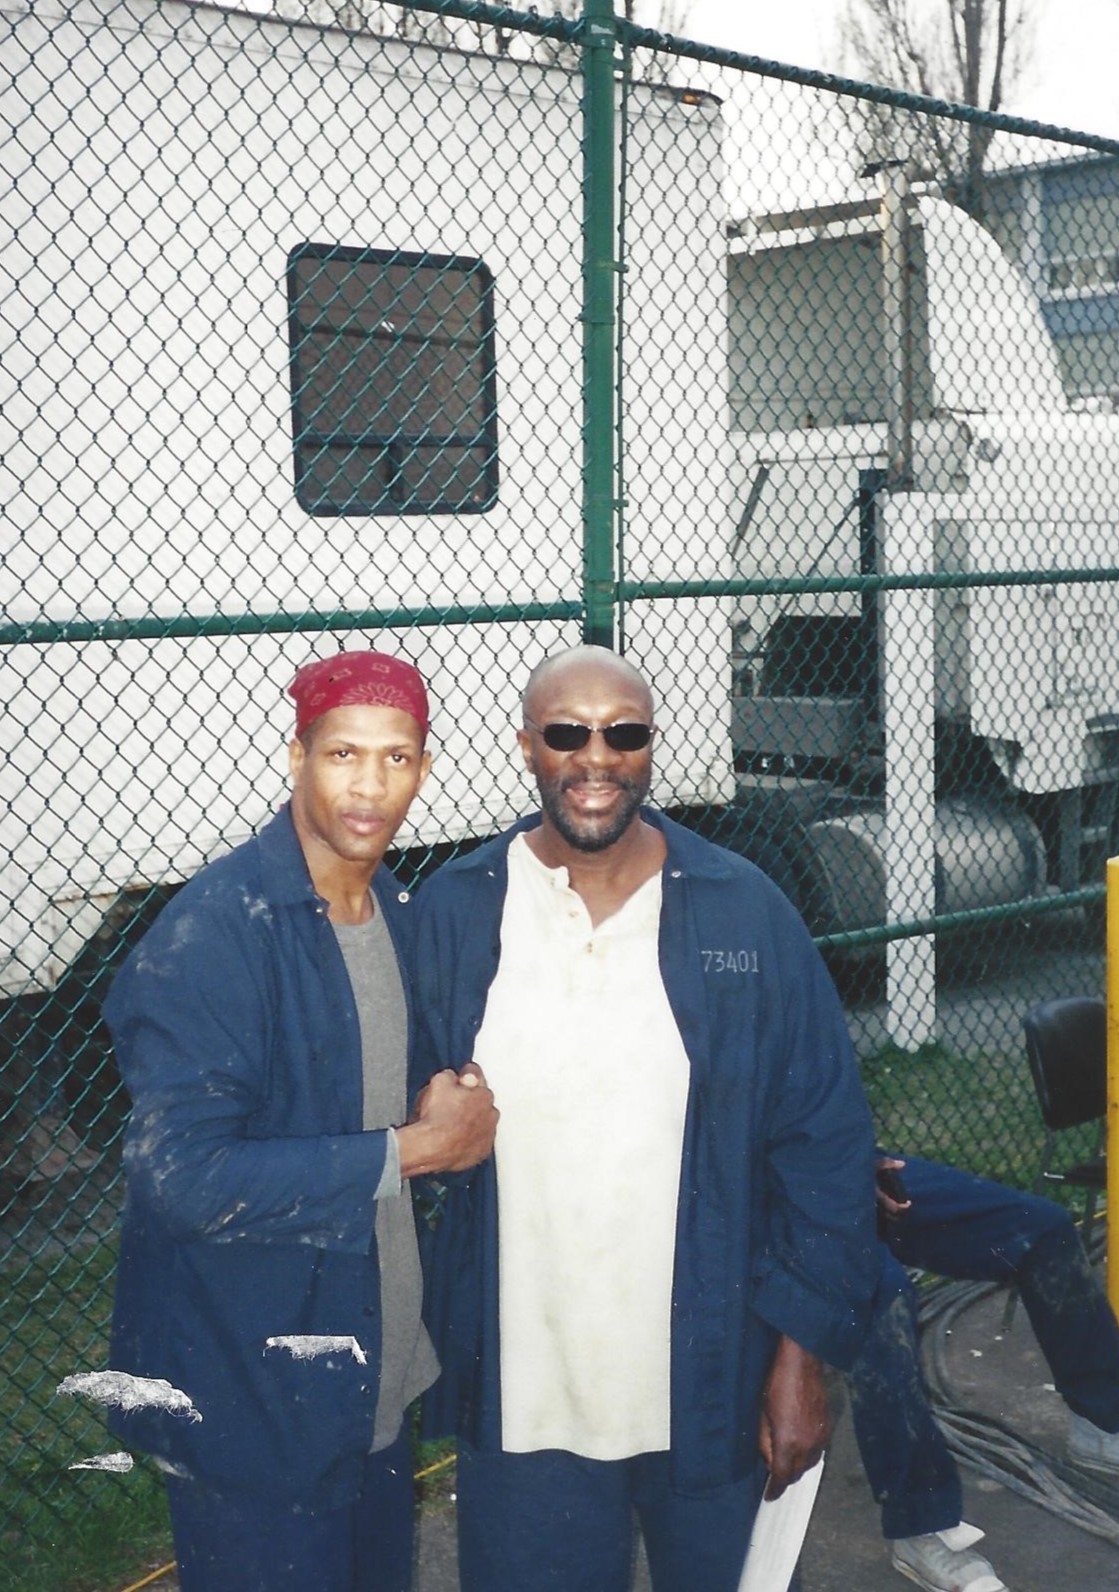 The late great and my homie Mr. Isaac Hayes! Rest in peace my brother! I enjoyed sitting on a film set in Vancouver sharing stories about the old neighbourhood.